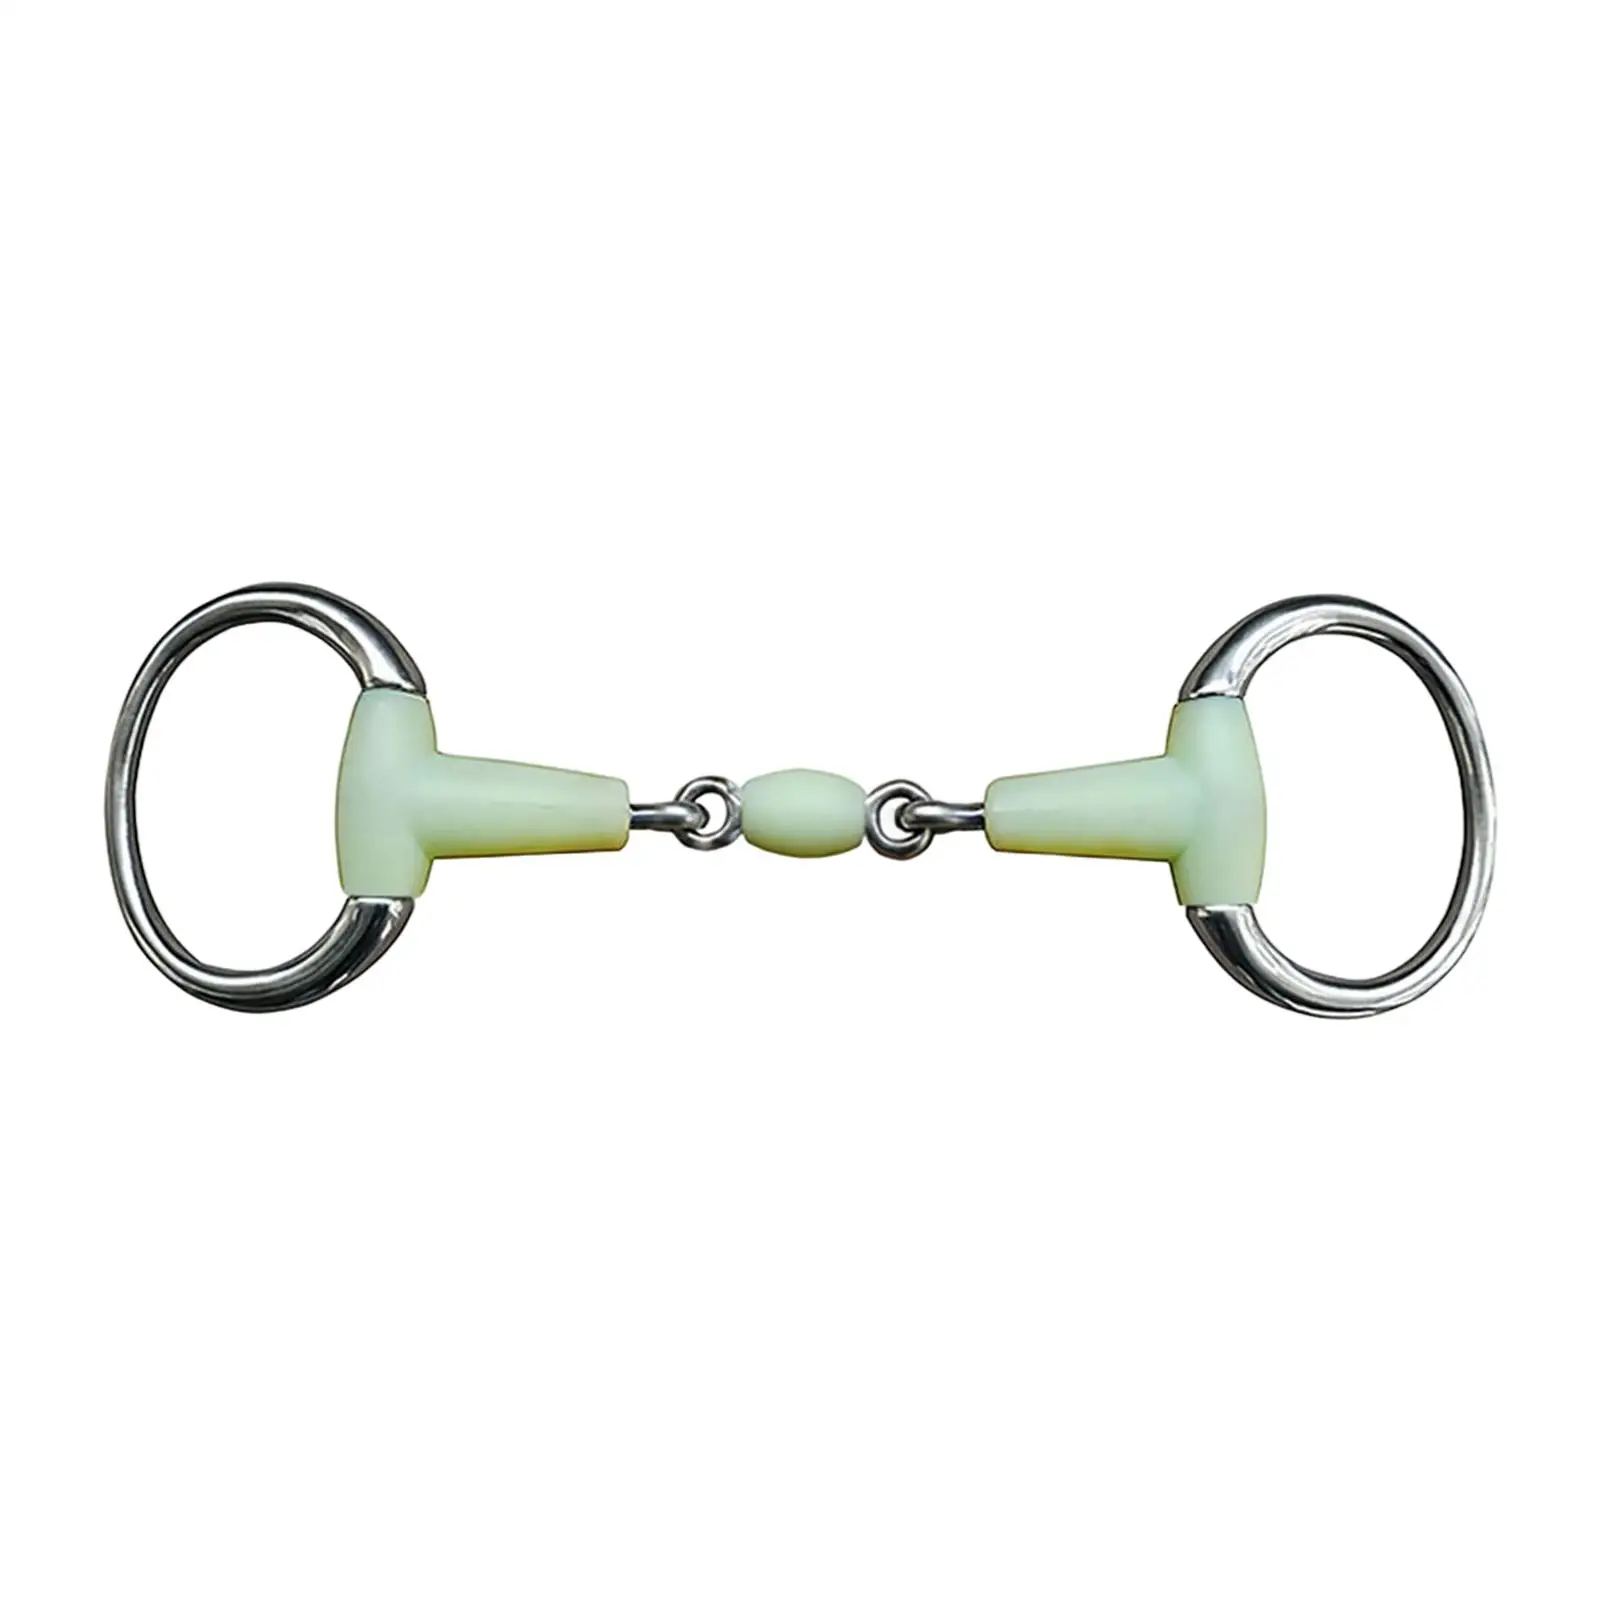 Ultralight Horse Bit Mouth Horse Training Snaffle Tool Stainless Steel for Horse